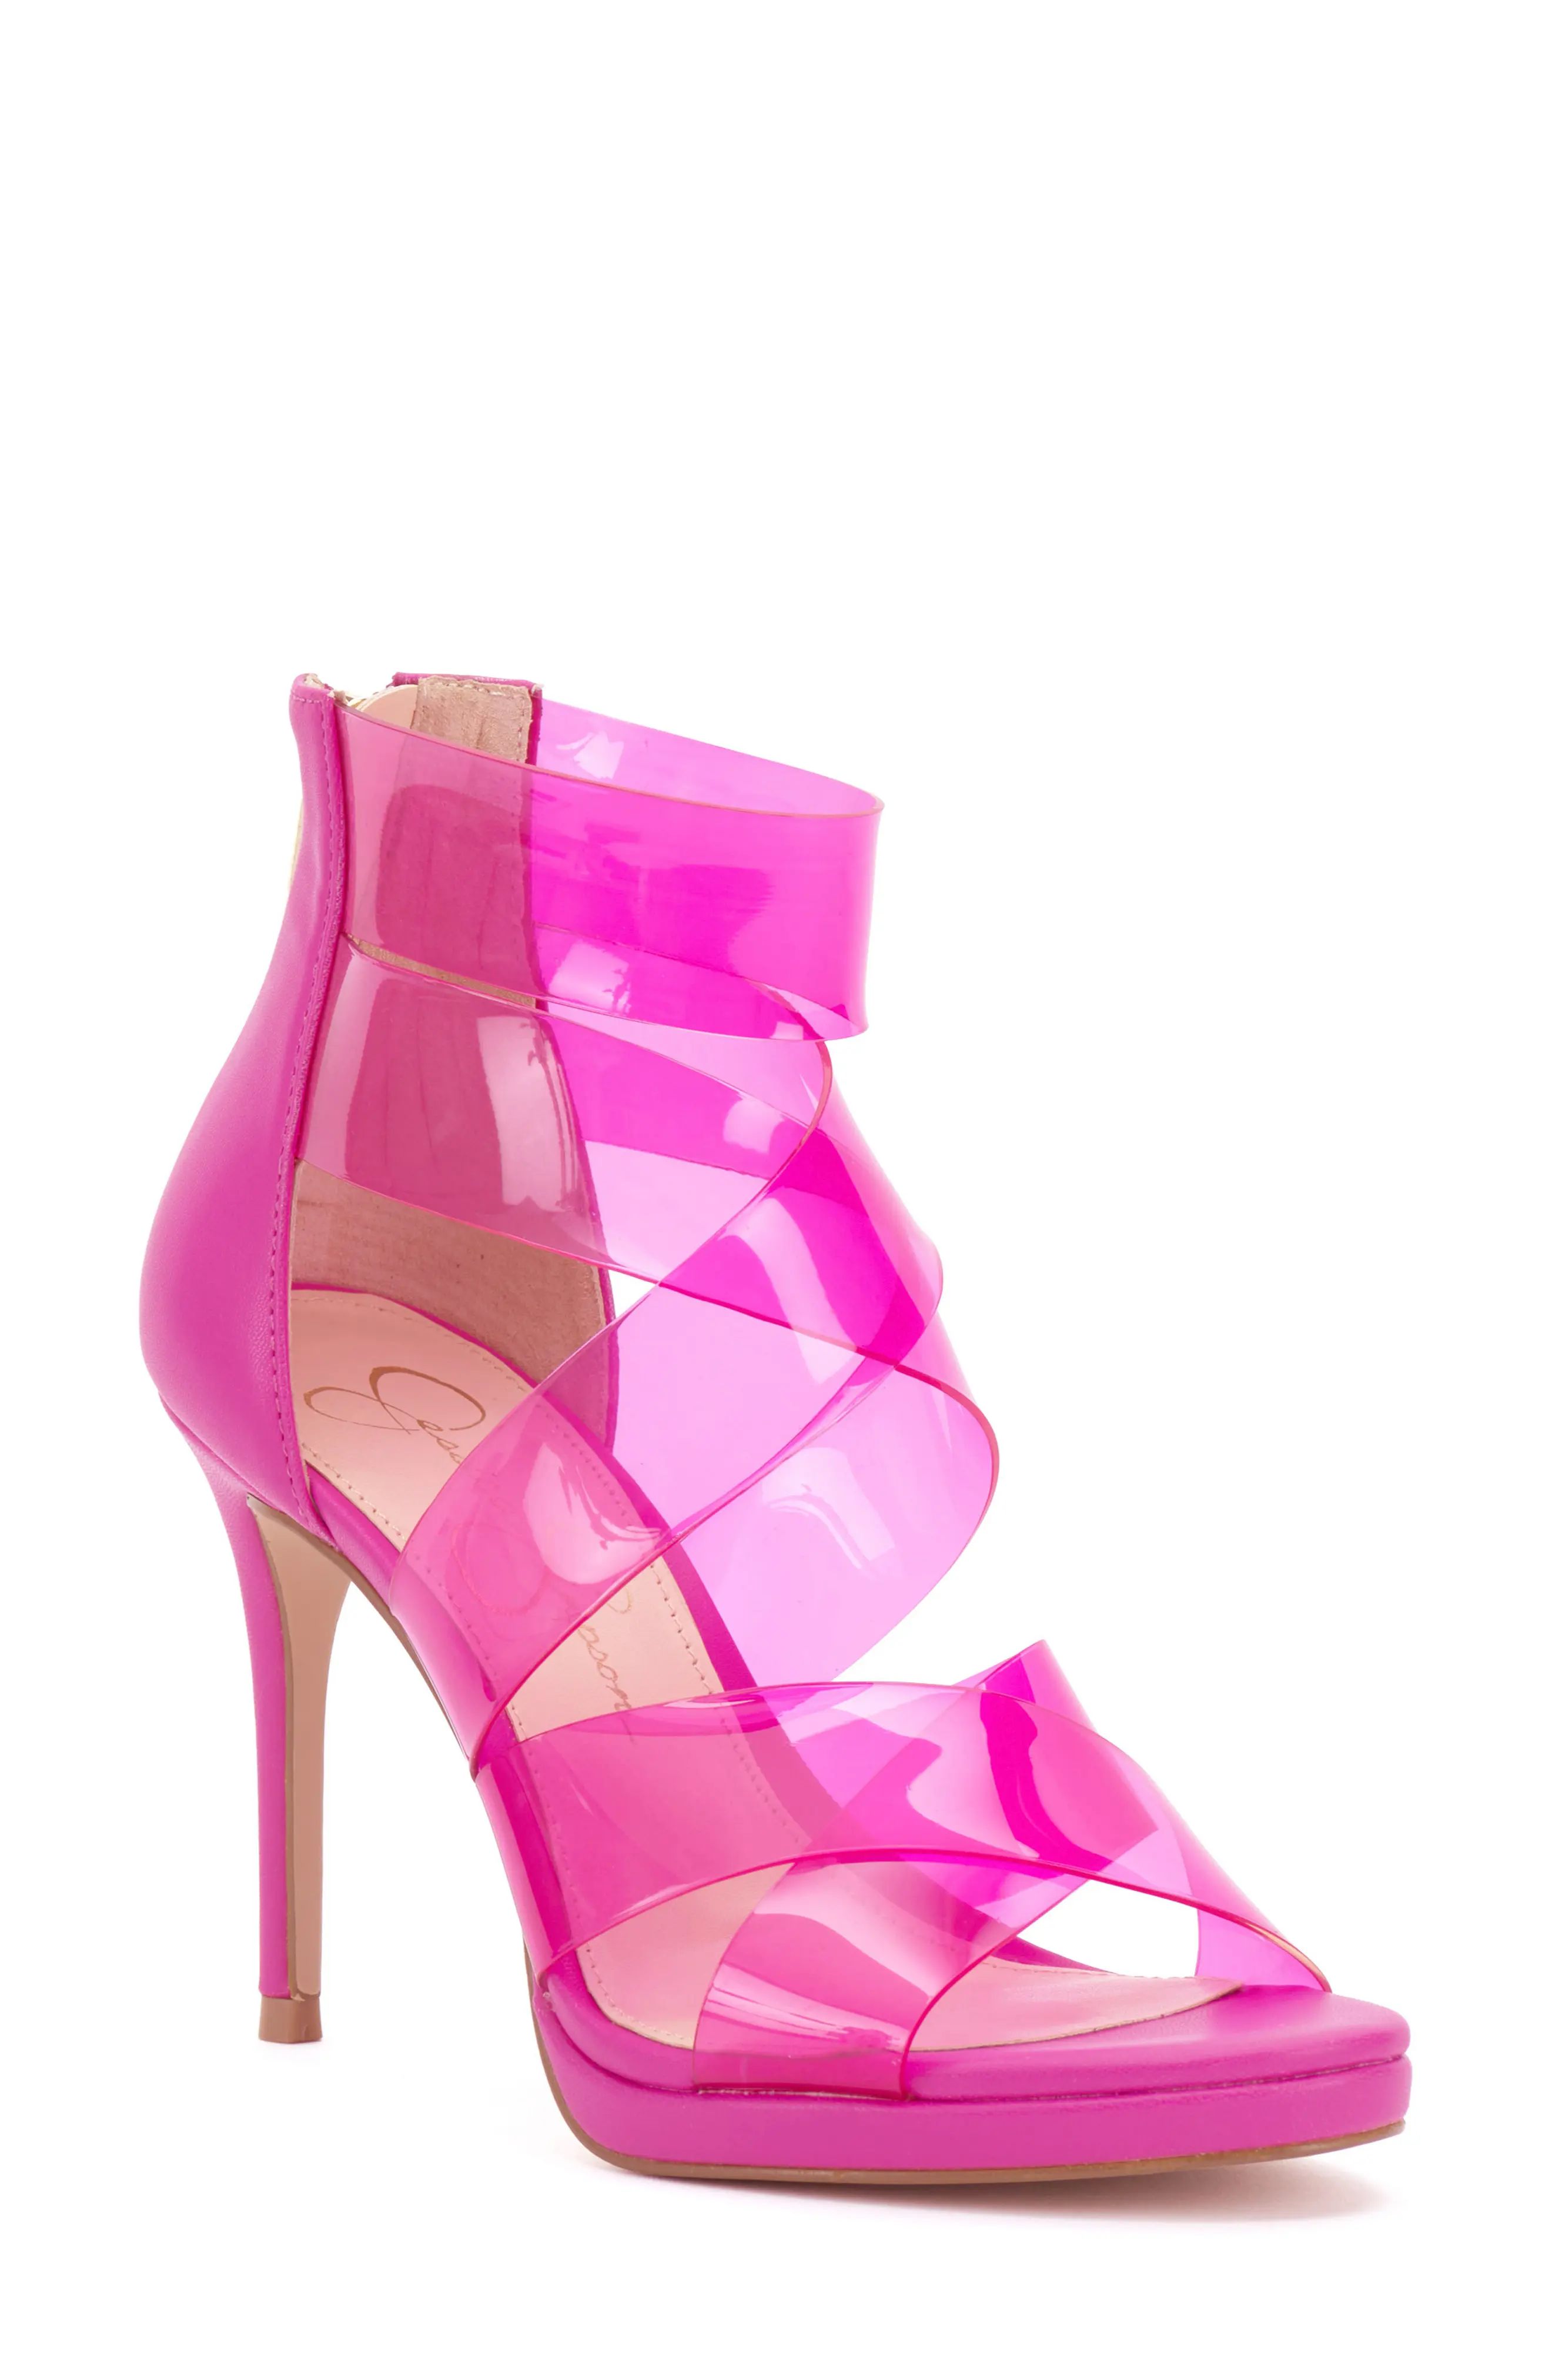 Jessica Simpson Dysti Clear Sandal in Calypso Pink at Nordstrom, Size 6.5 | Nordstrom